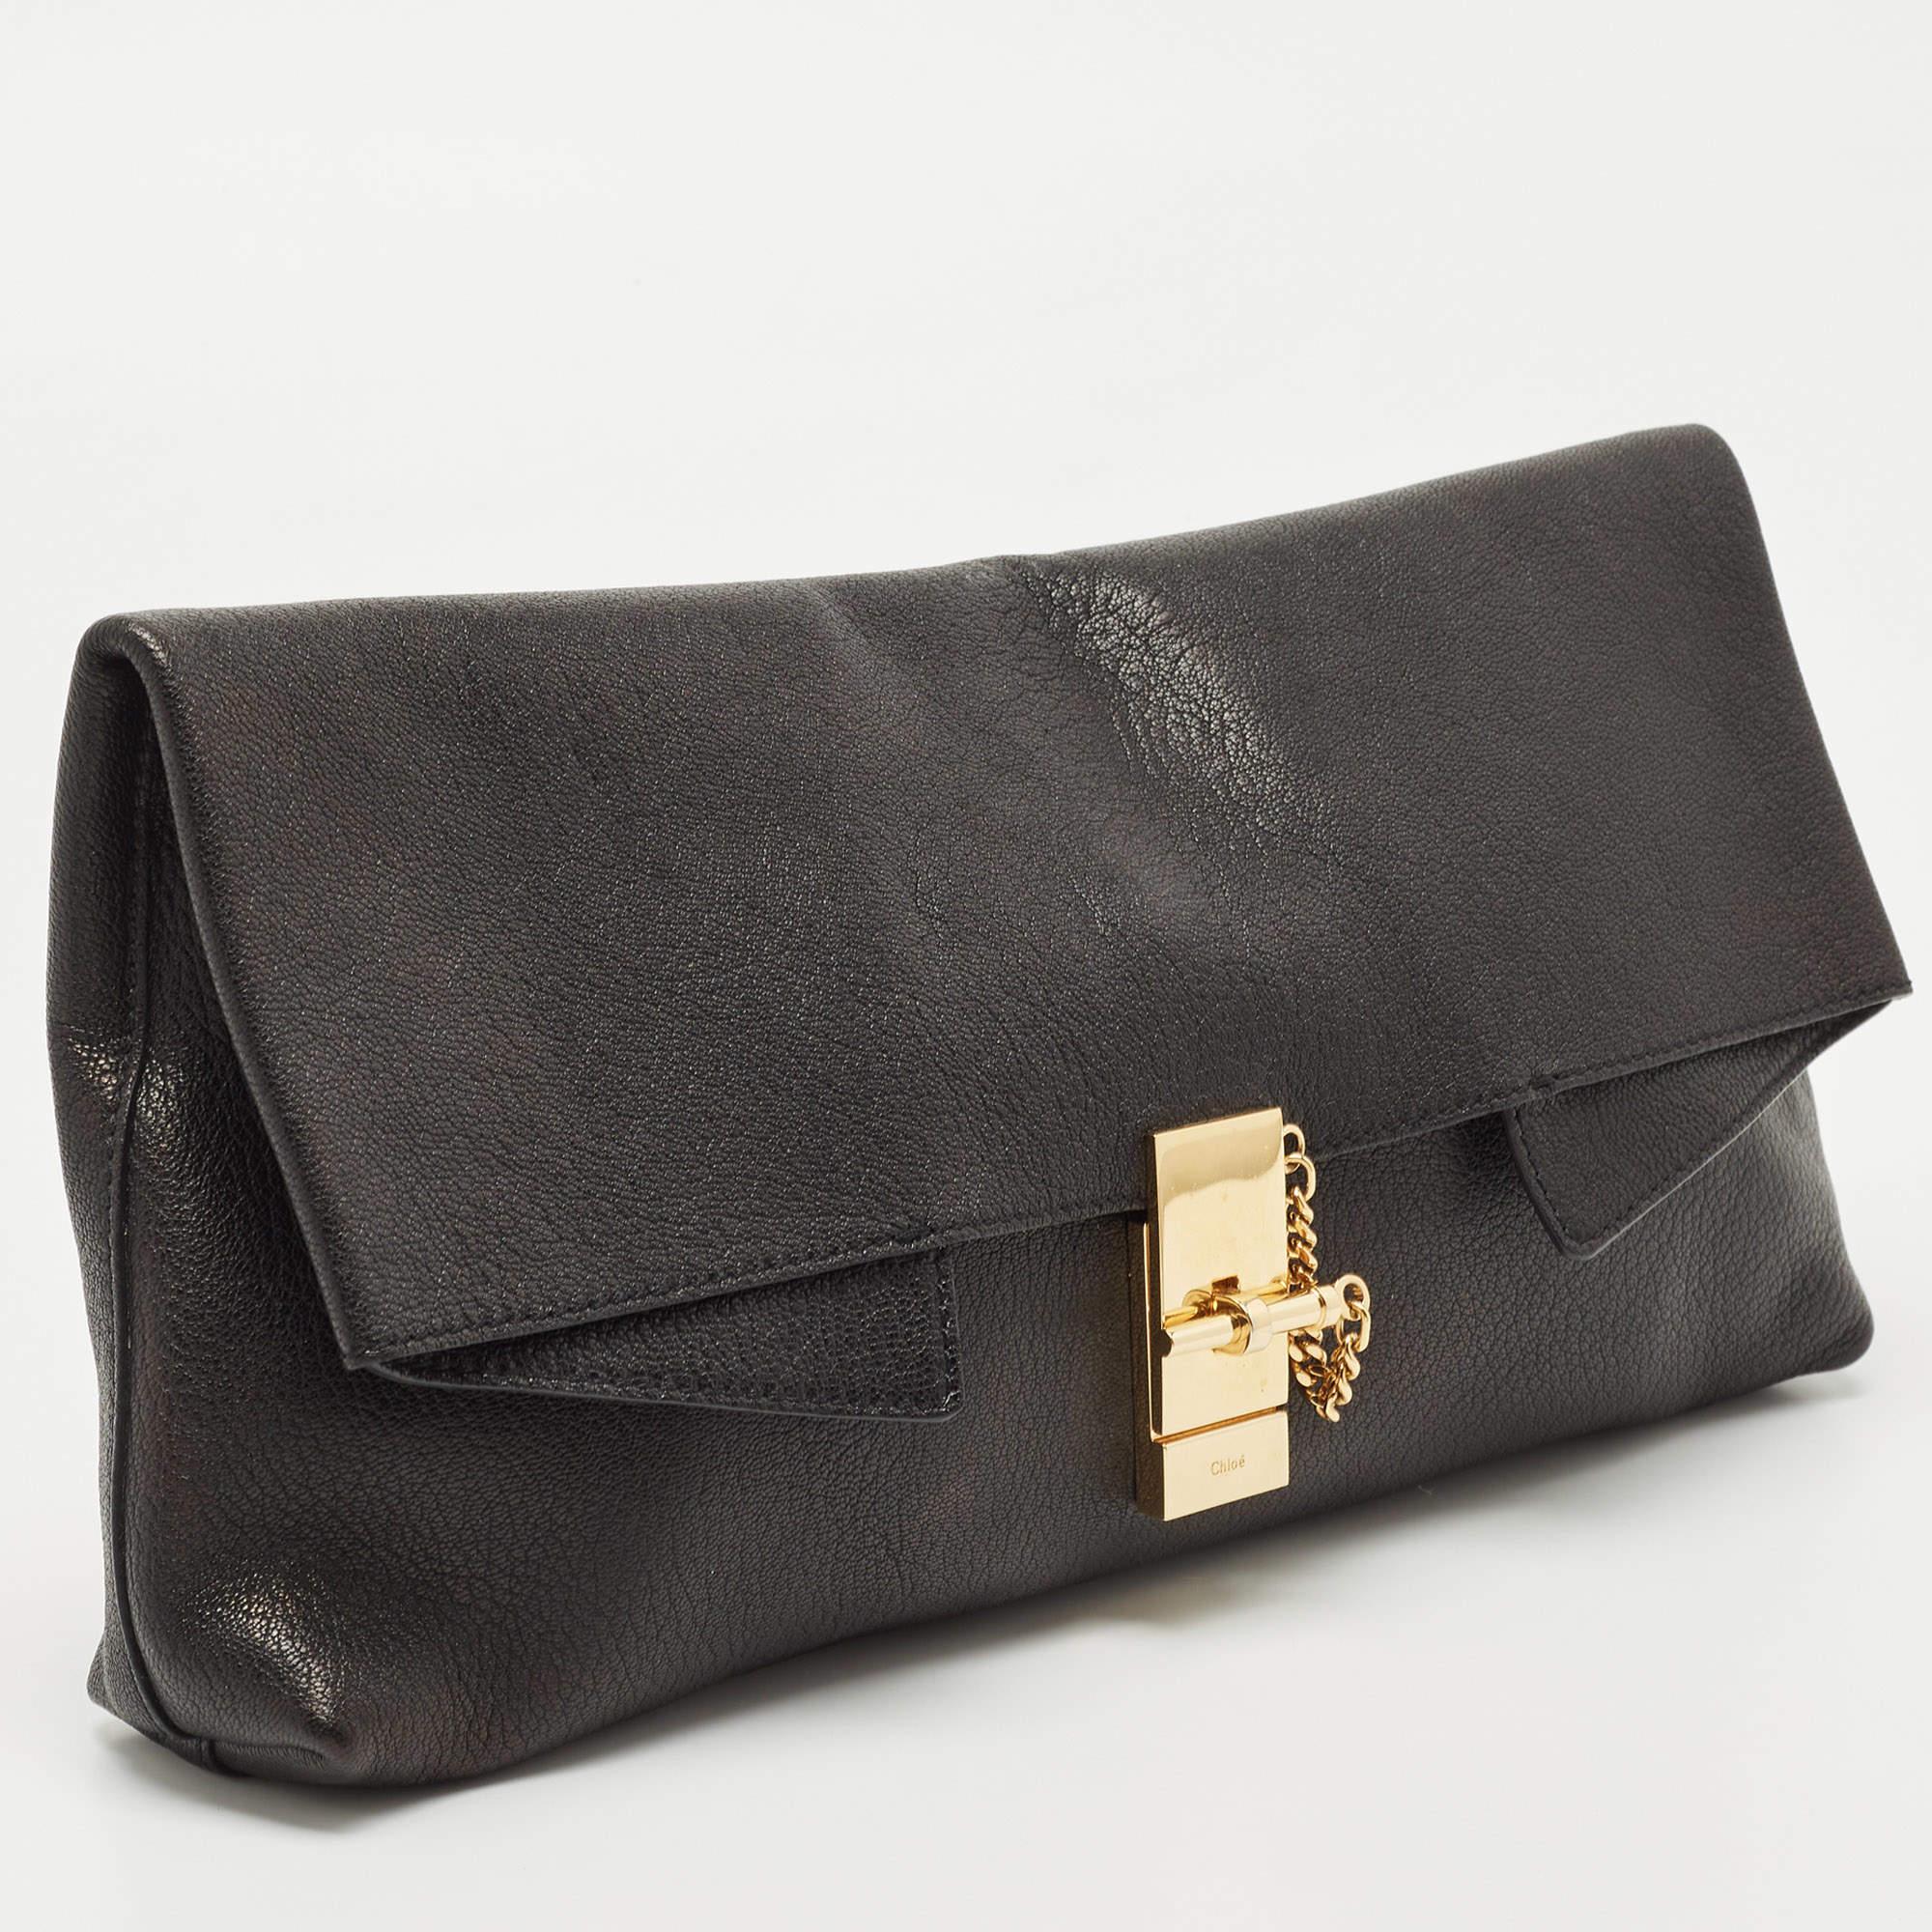 Chloe Black Grained Leather Drew Fold Over Clutch 1